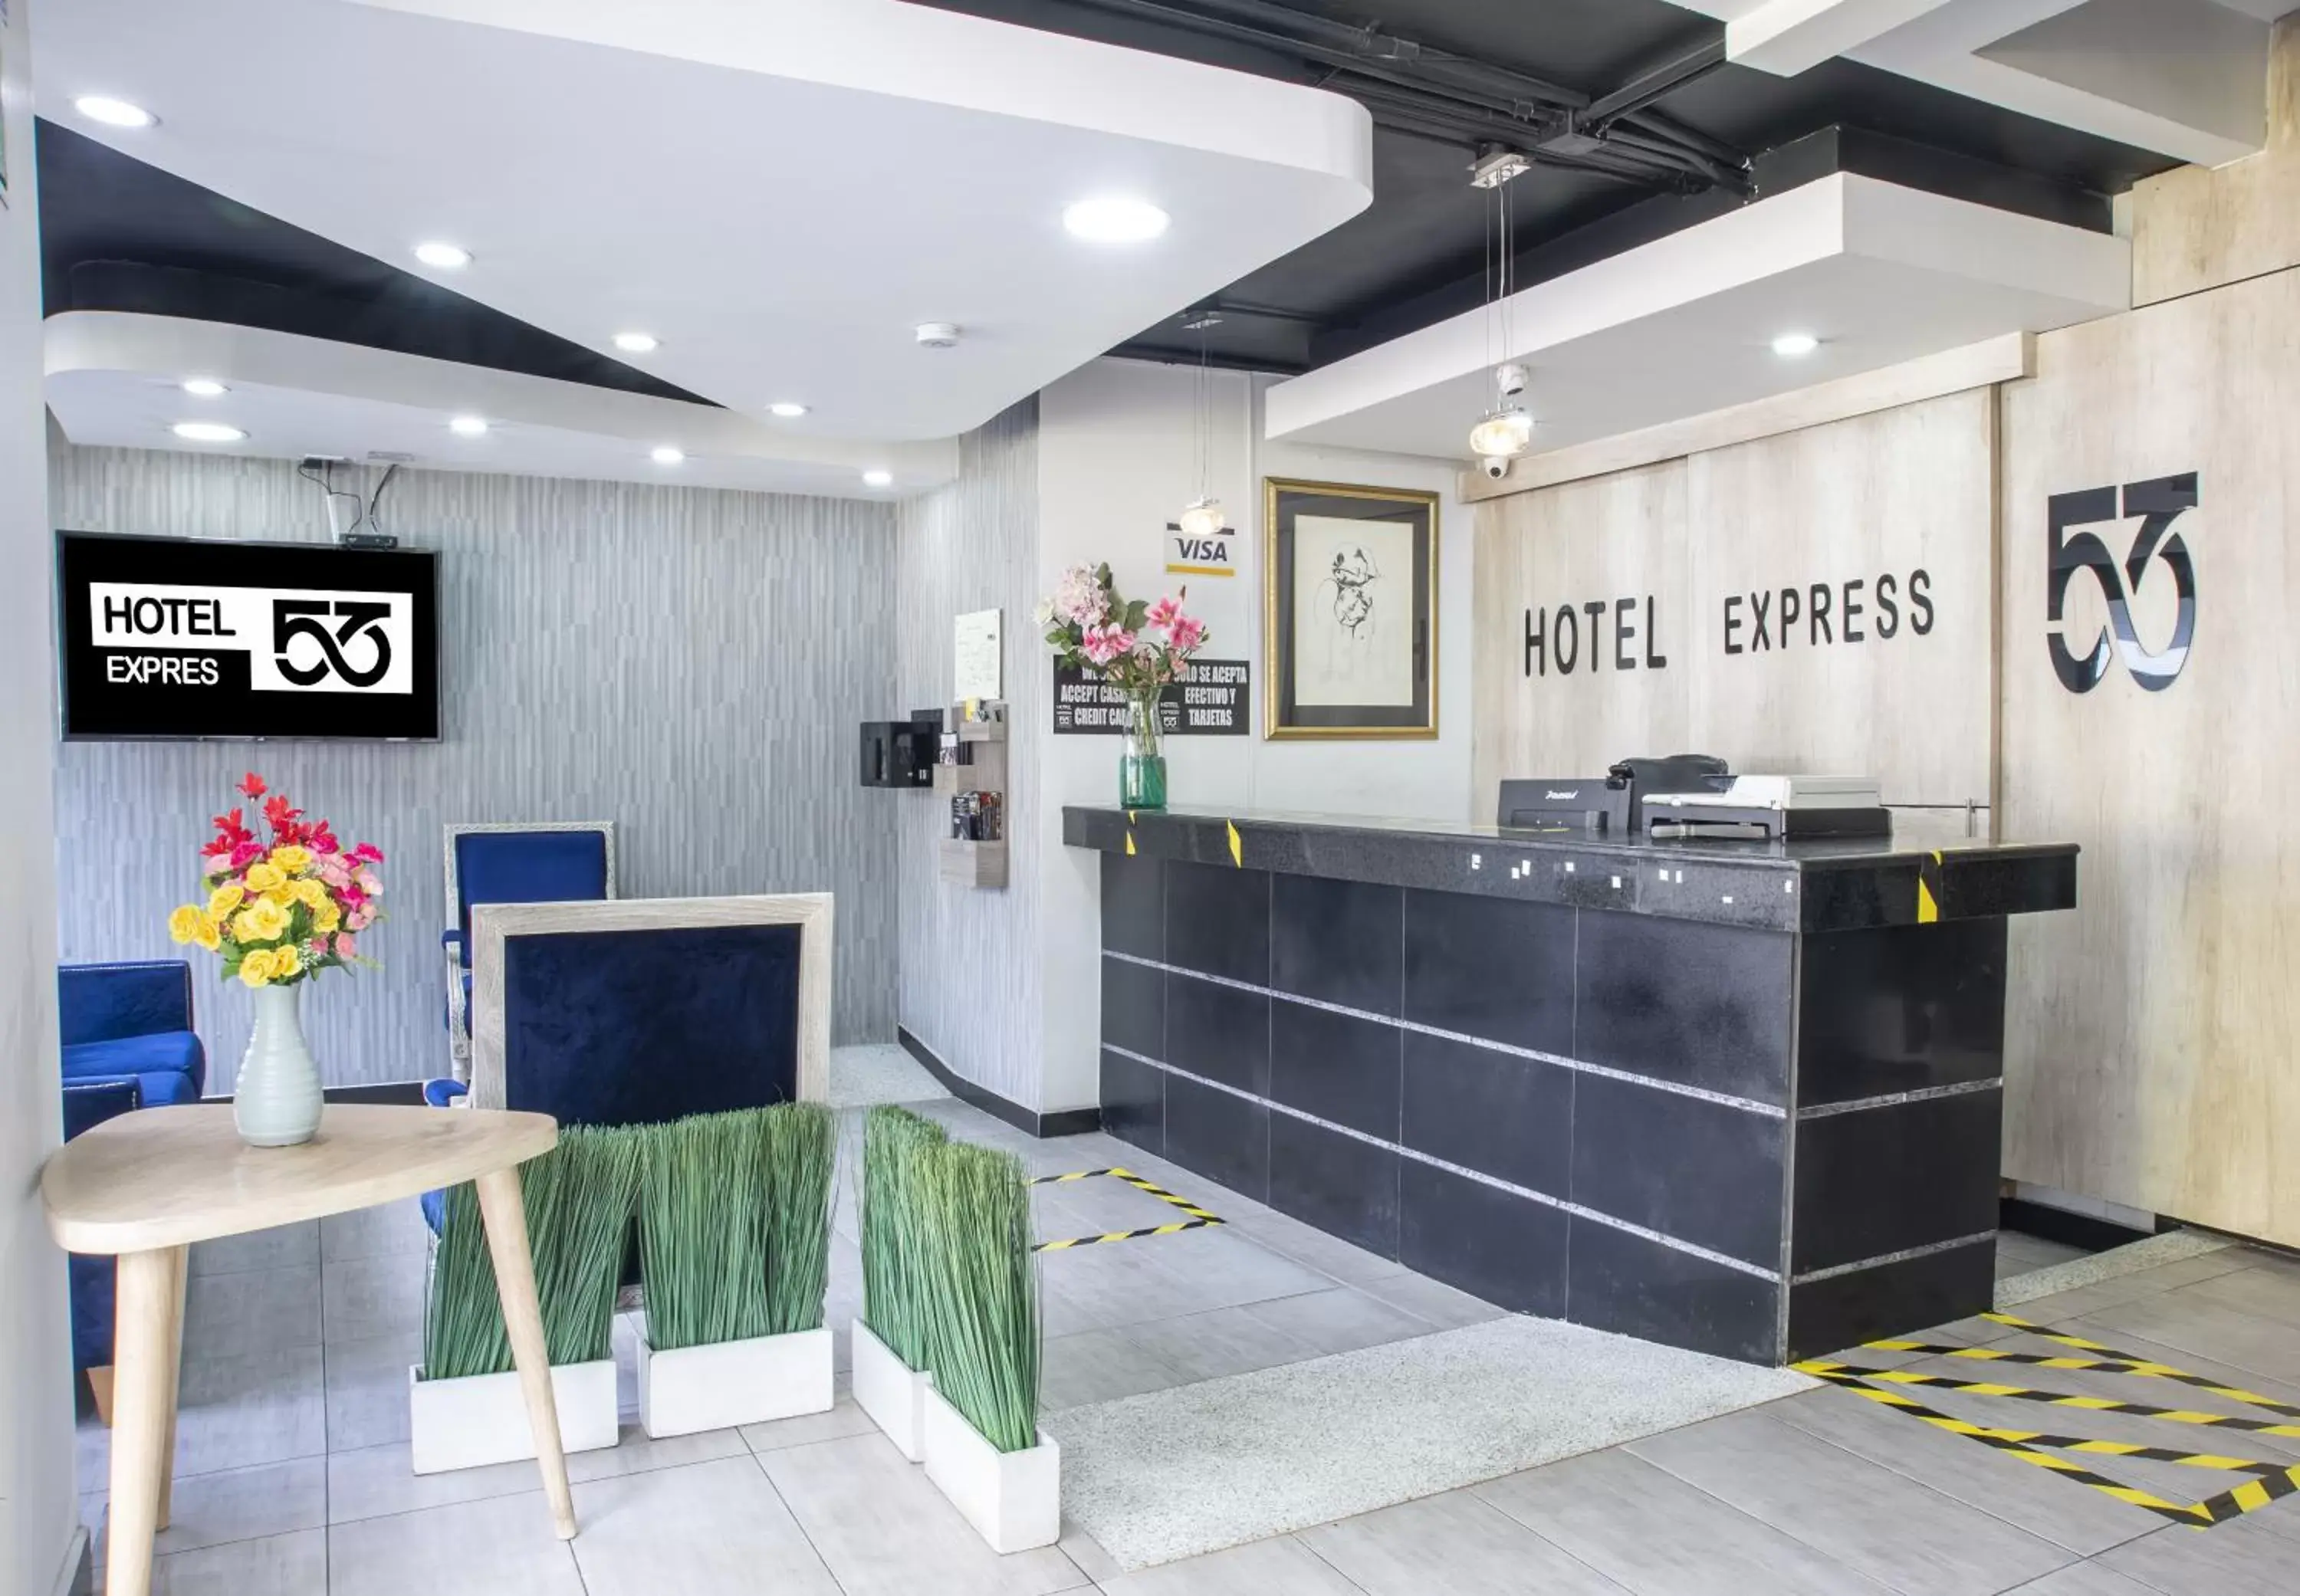 Property building, Lobby/Reception in Hotel Express 53